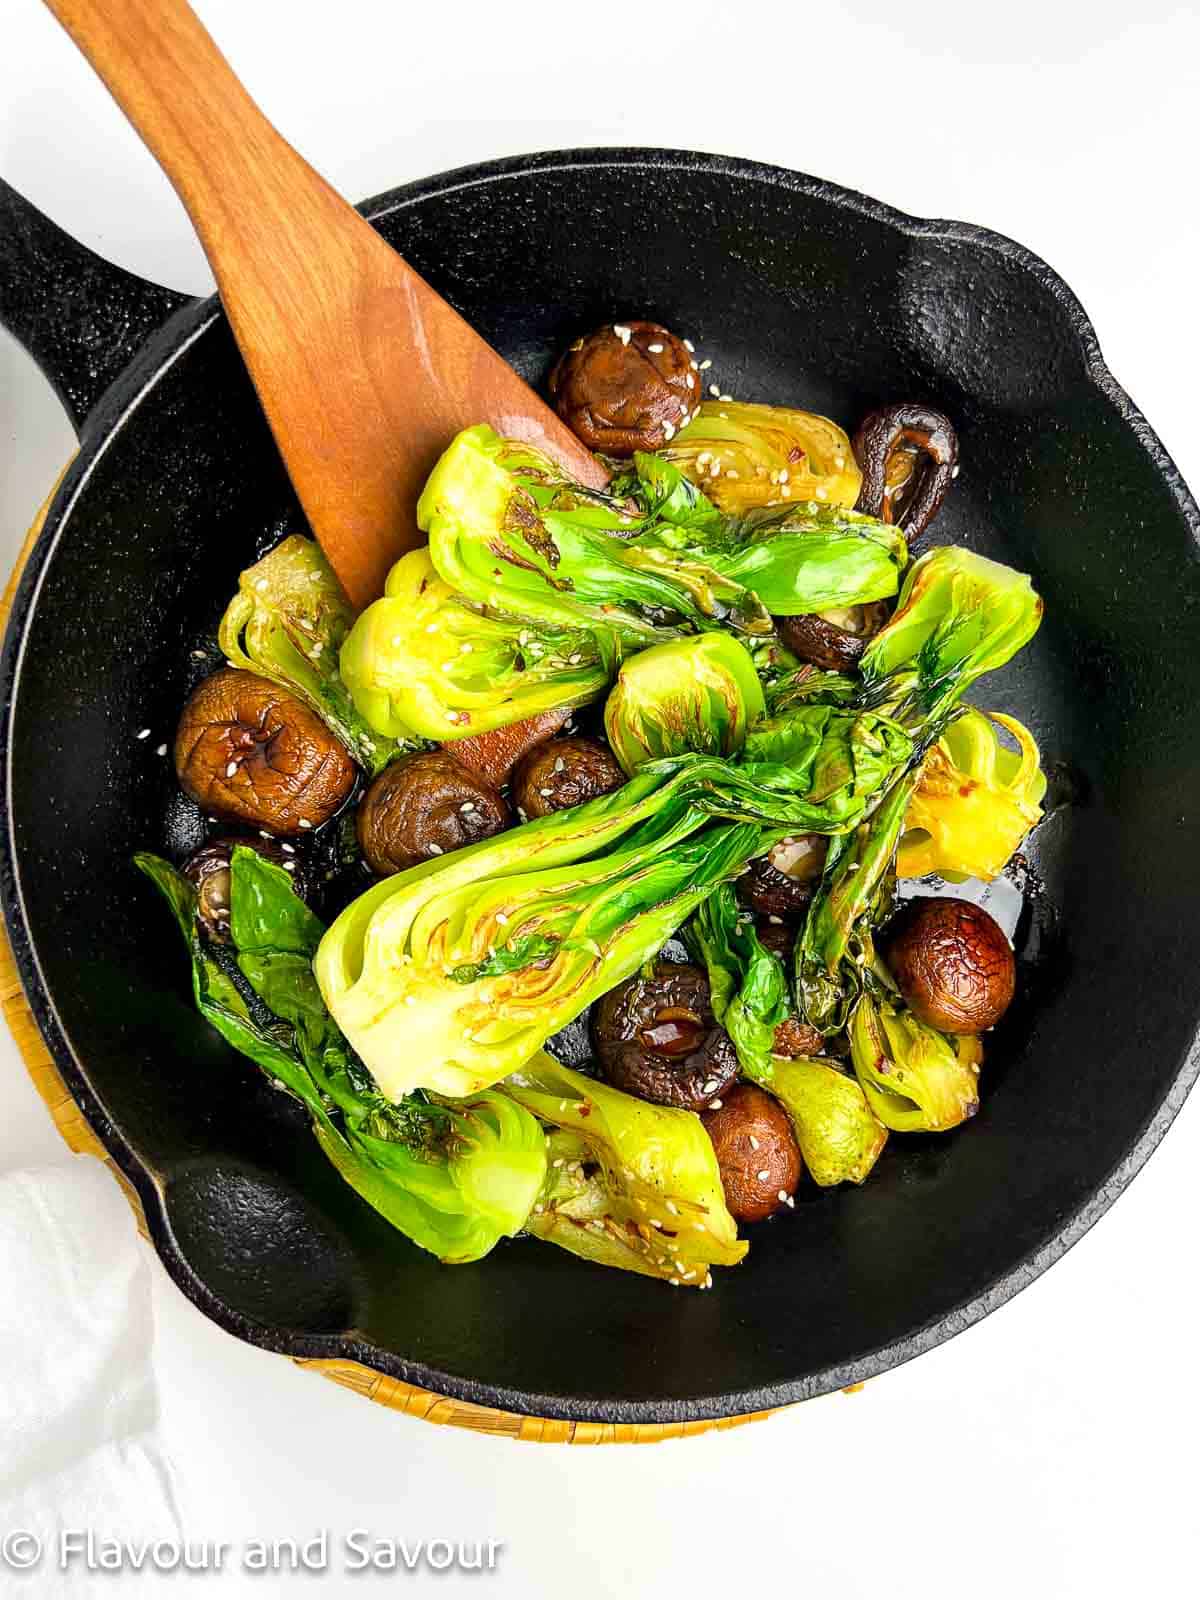 Shanghai bok choy and mushrooms with stir fry sauce in a cast iron skillet.